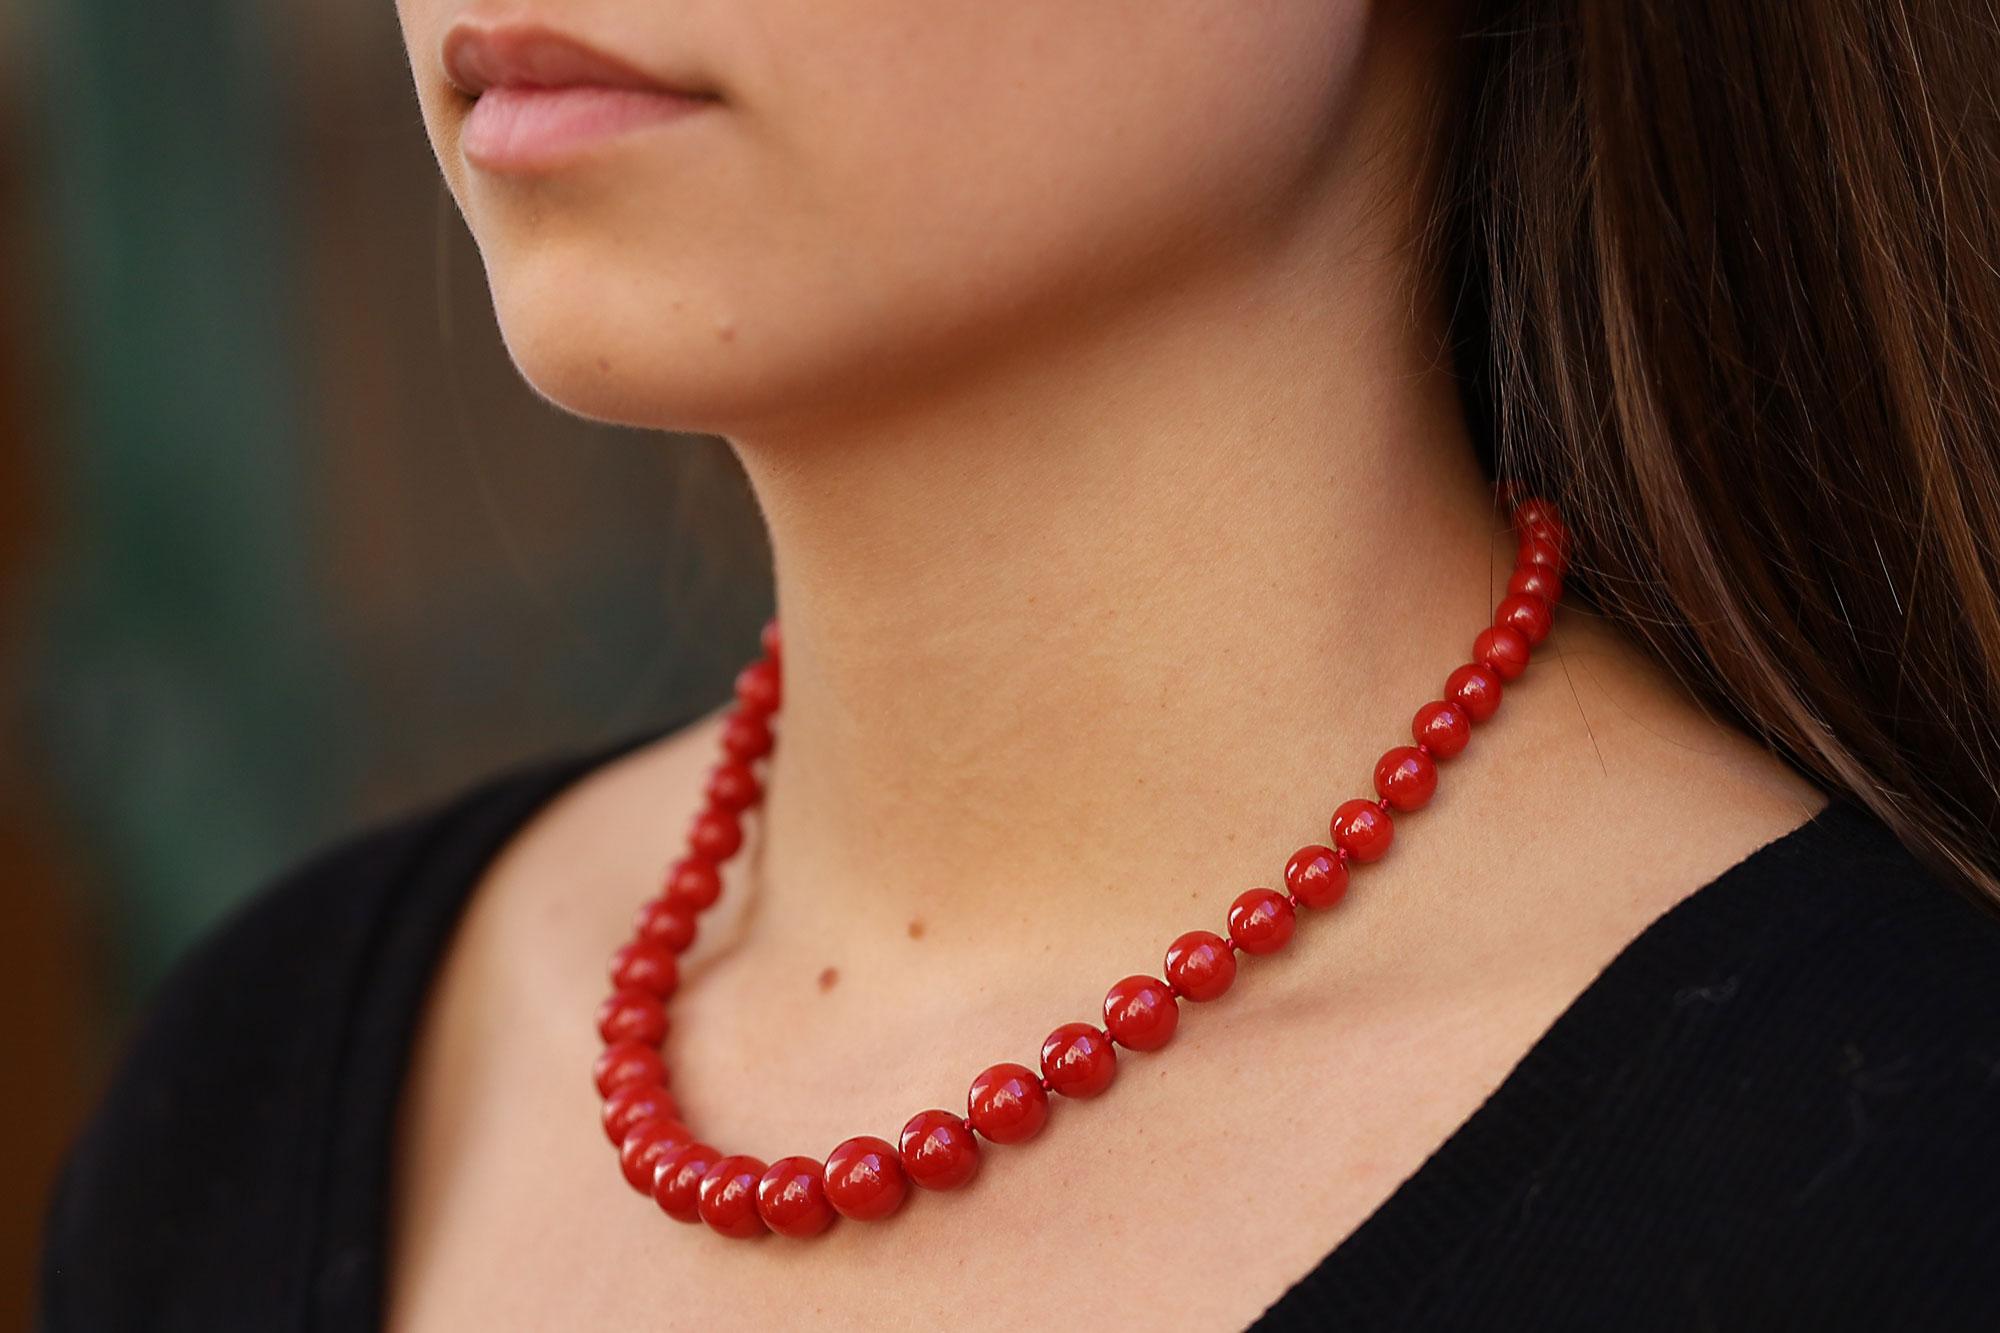 blood coral necklace